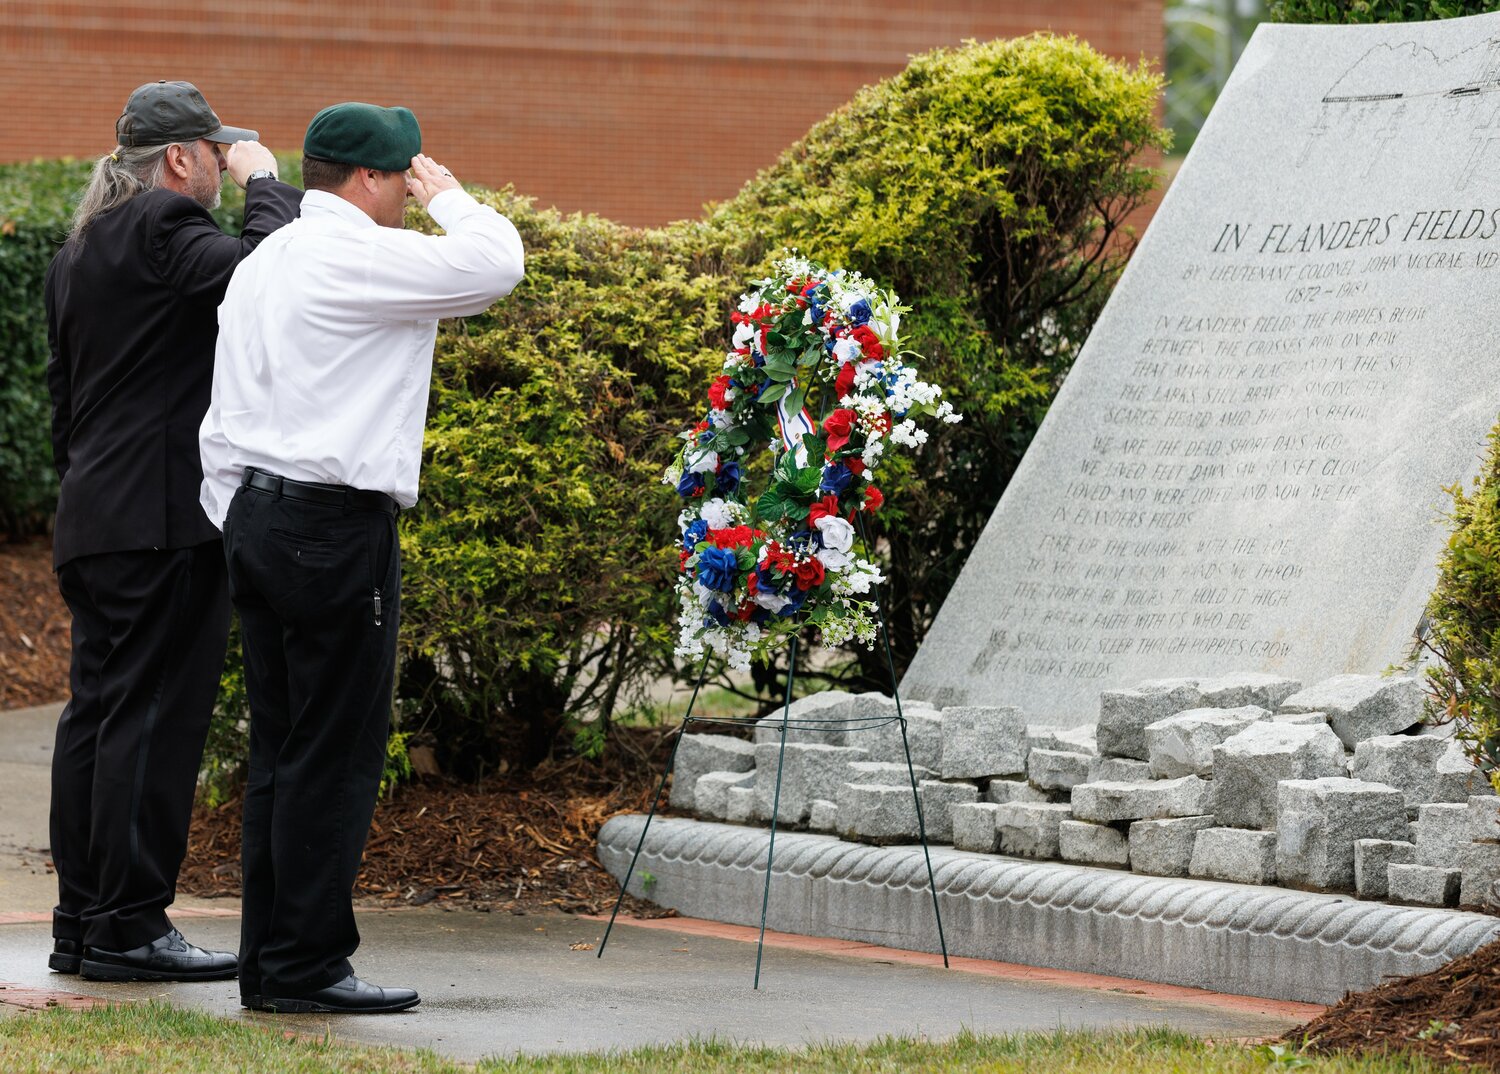 A wreath is lain at a monument during the Memorial Day ceremony at Freedom Memorial Park.